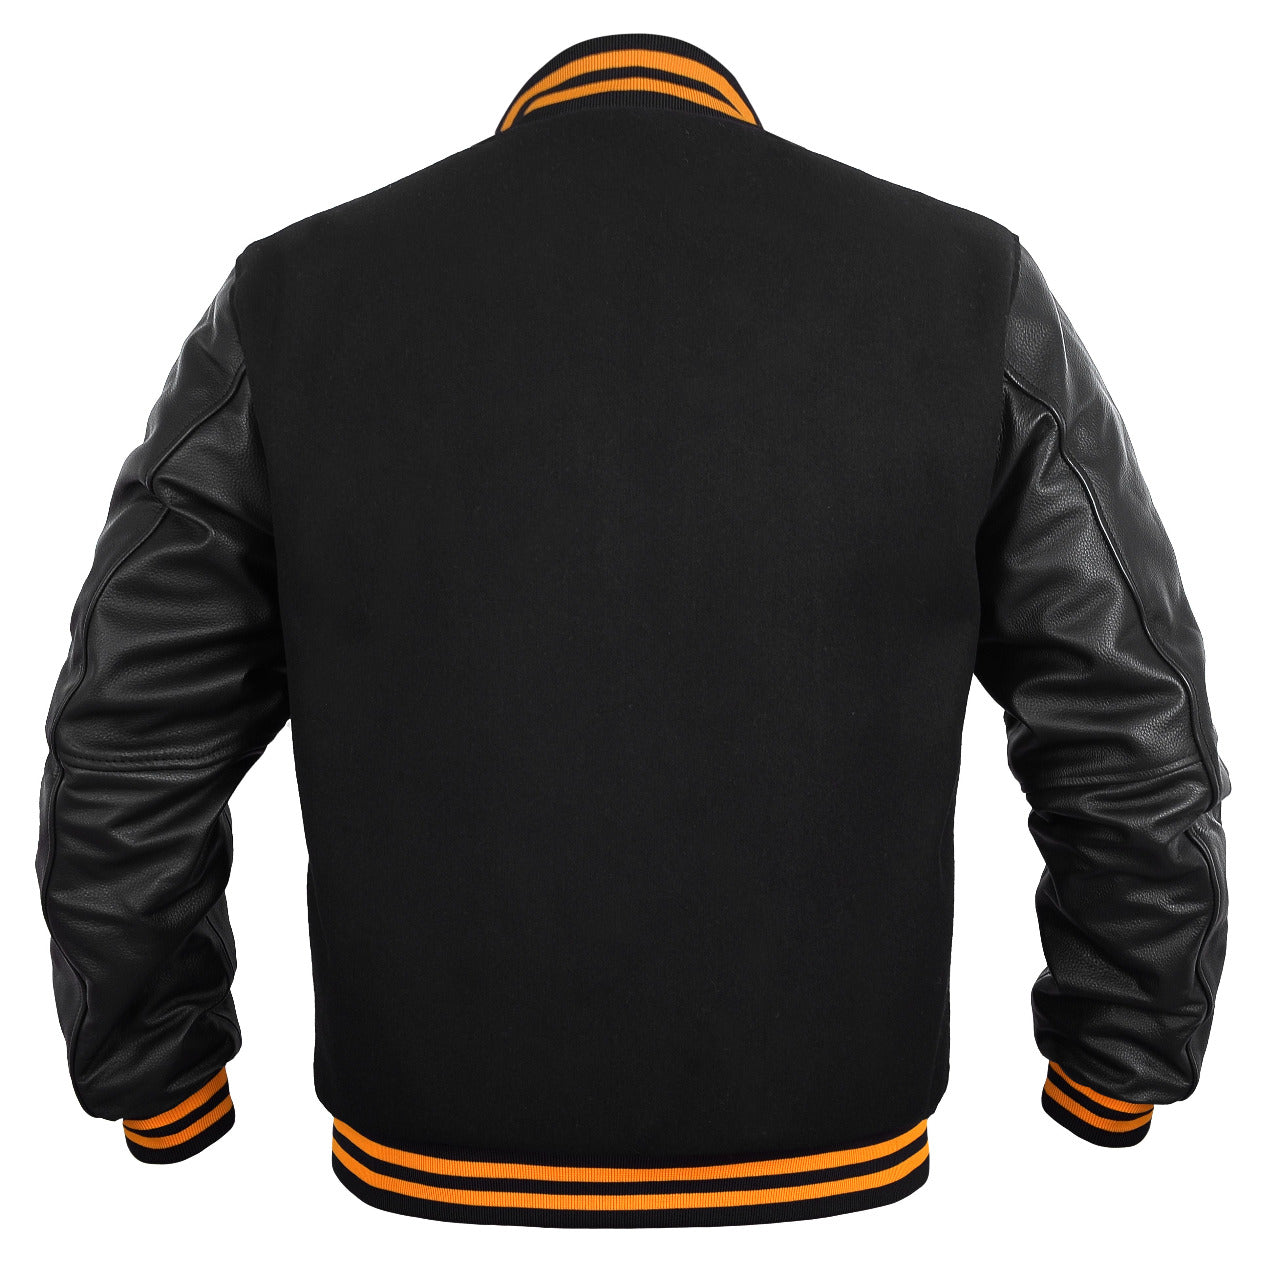 Men’s Varsity Jacket Genuine Leather Sleeve and Wool Body All Black(Yellow Line)